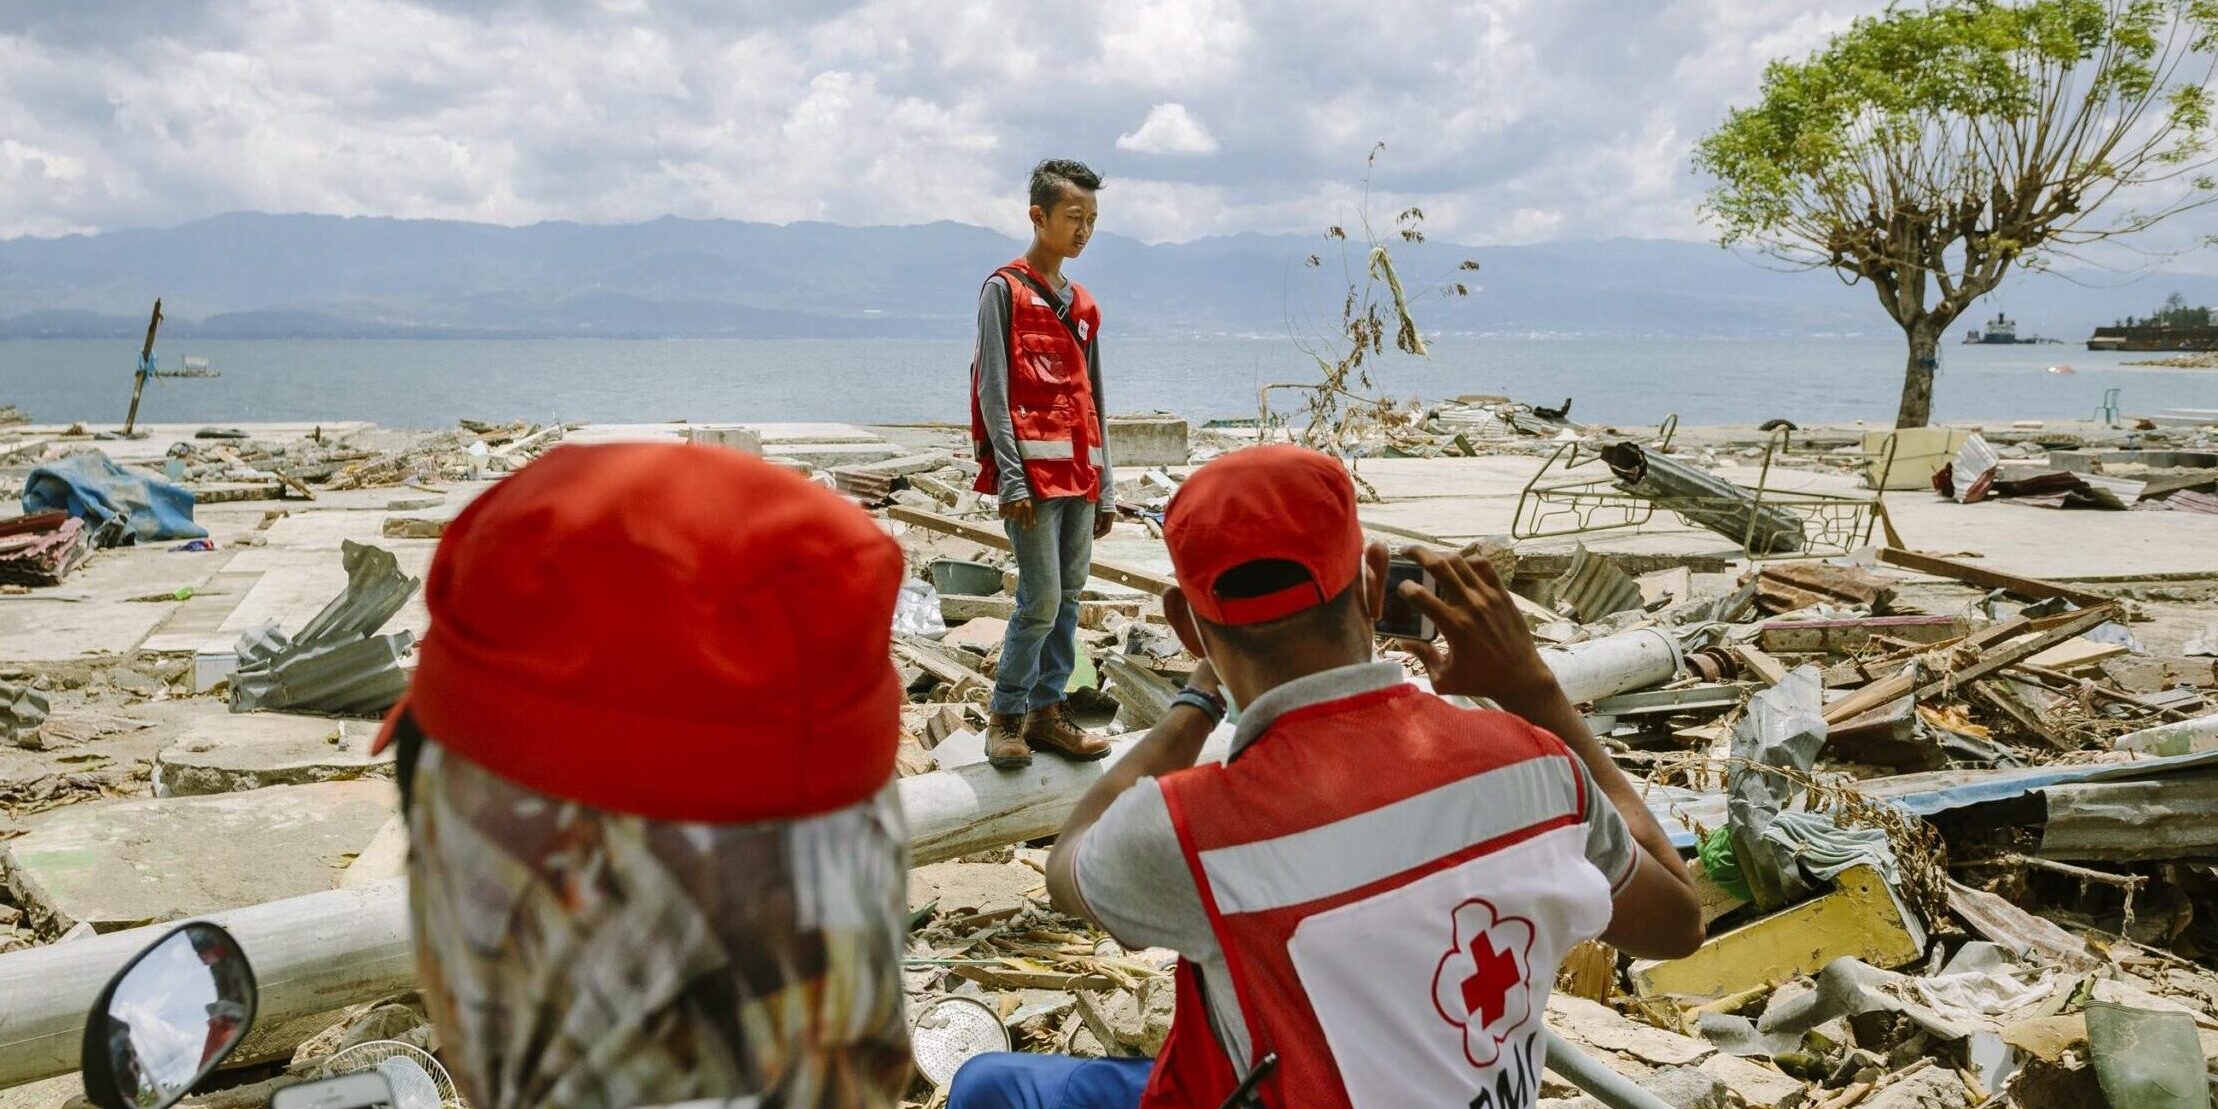 2018 October 7th. Finnish Red Cross earthquake and tsunami response in Donggala, Sulawesi, Indonesia.

Palang Merah Indonesia (PMI) volunteers by the beach in Loli Saluran, Donggala, Sulawesi, Indonesia. Photo: Benjamin Suomela/Finnish Red Cross